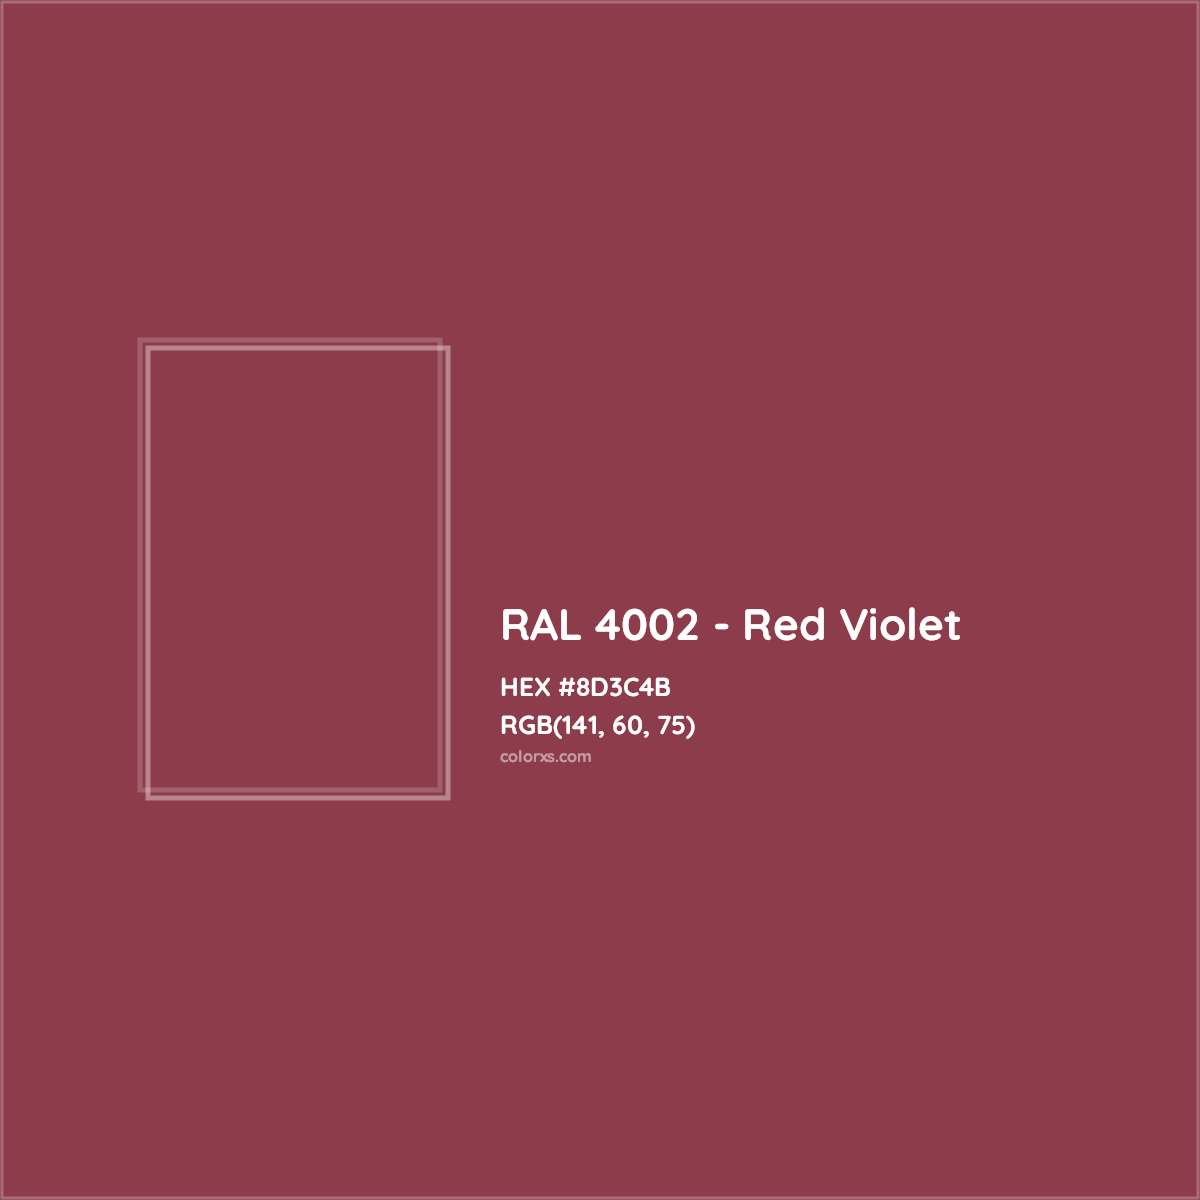 HEX #8D3C4B RAL 4002 - Red Violet CMS RAL Classic - Color Code